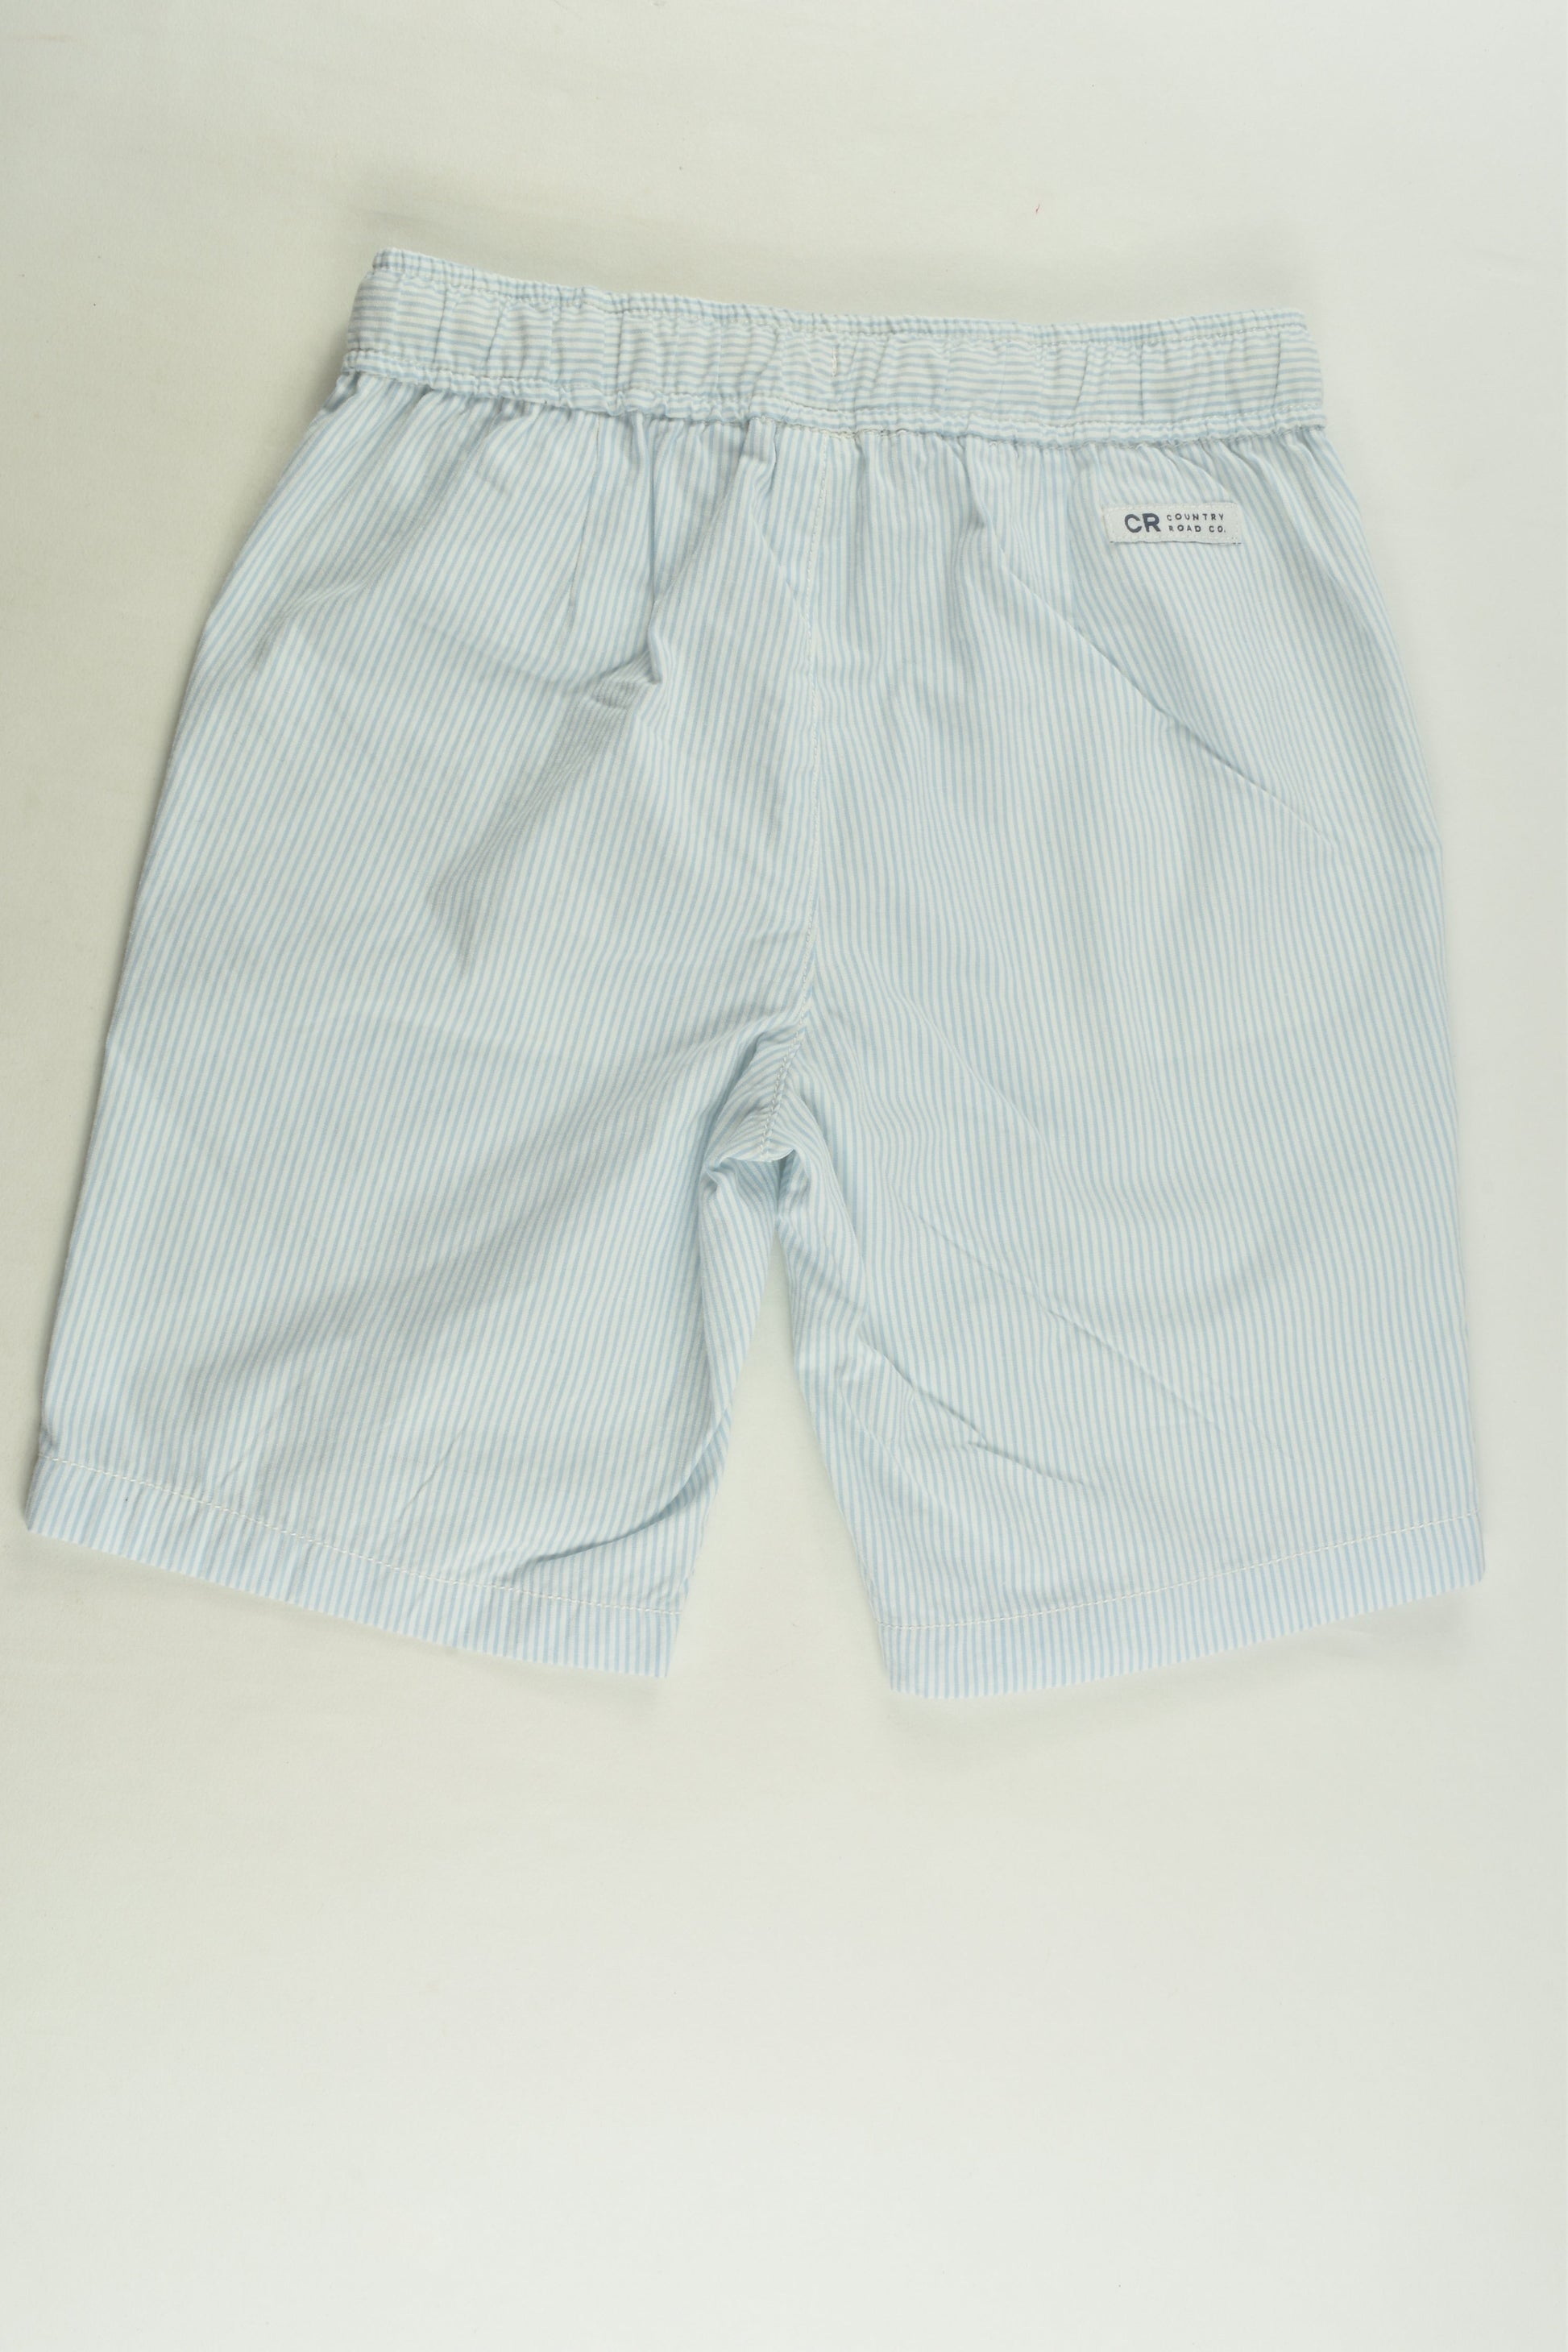 Country Road Size 6 Shorts